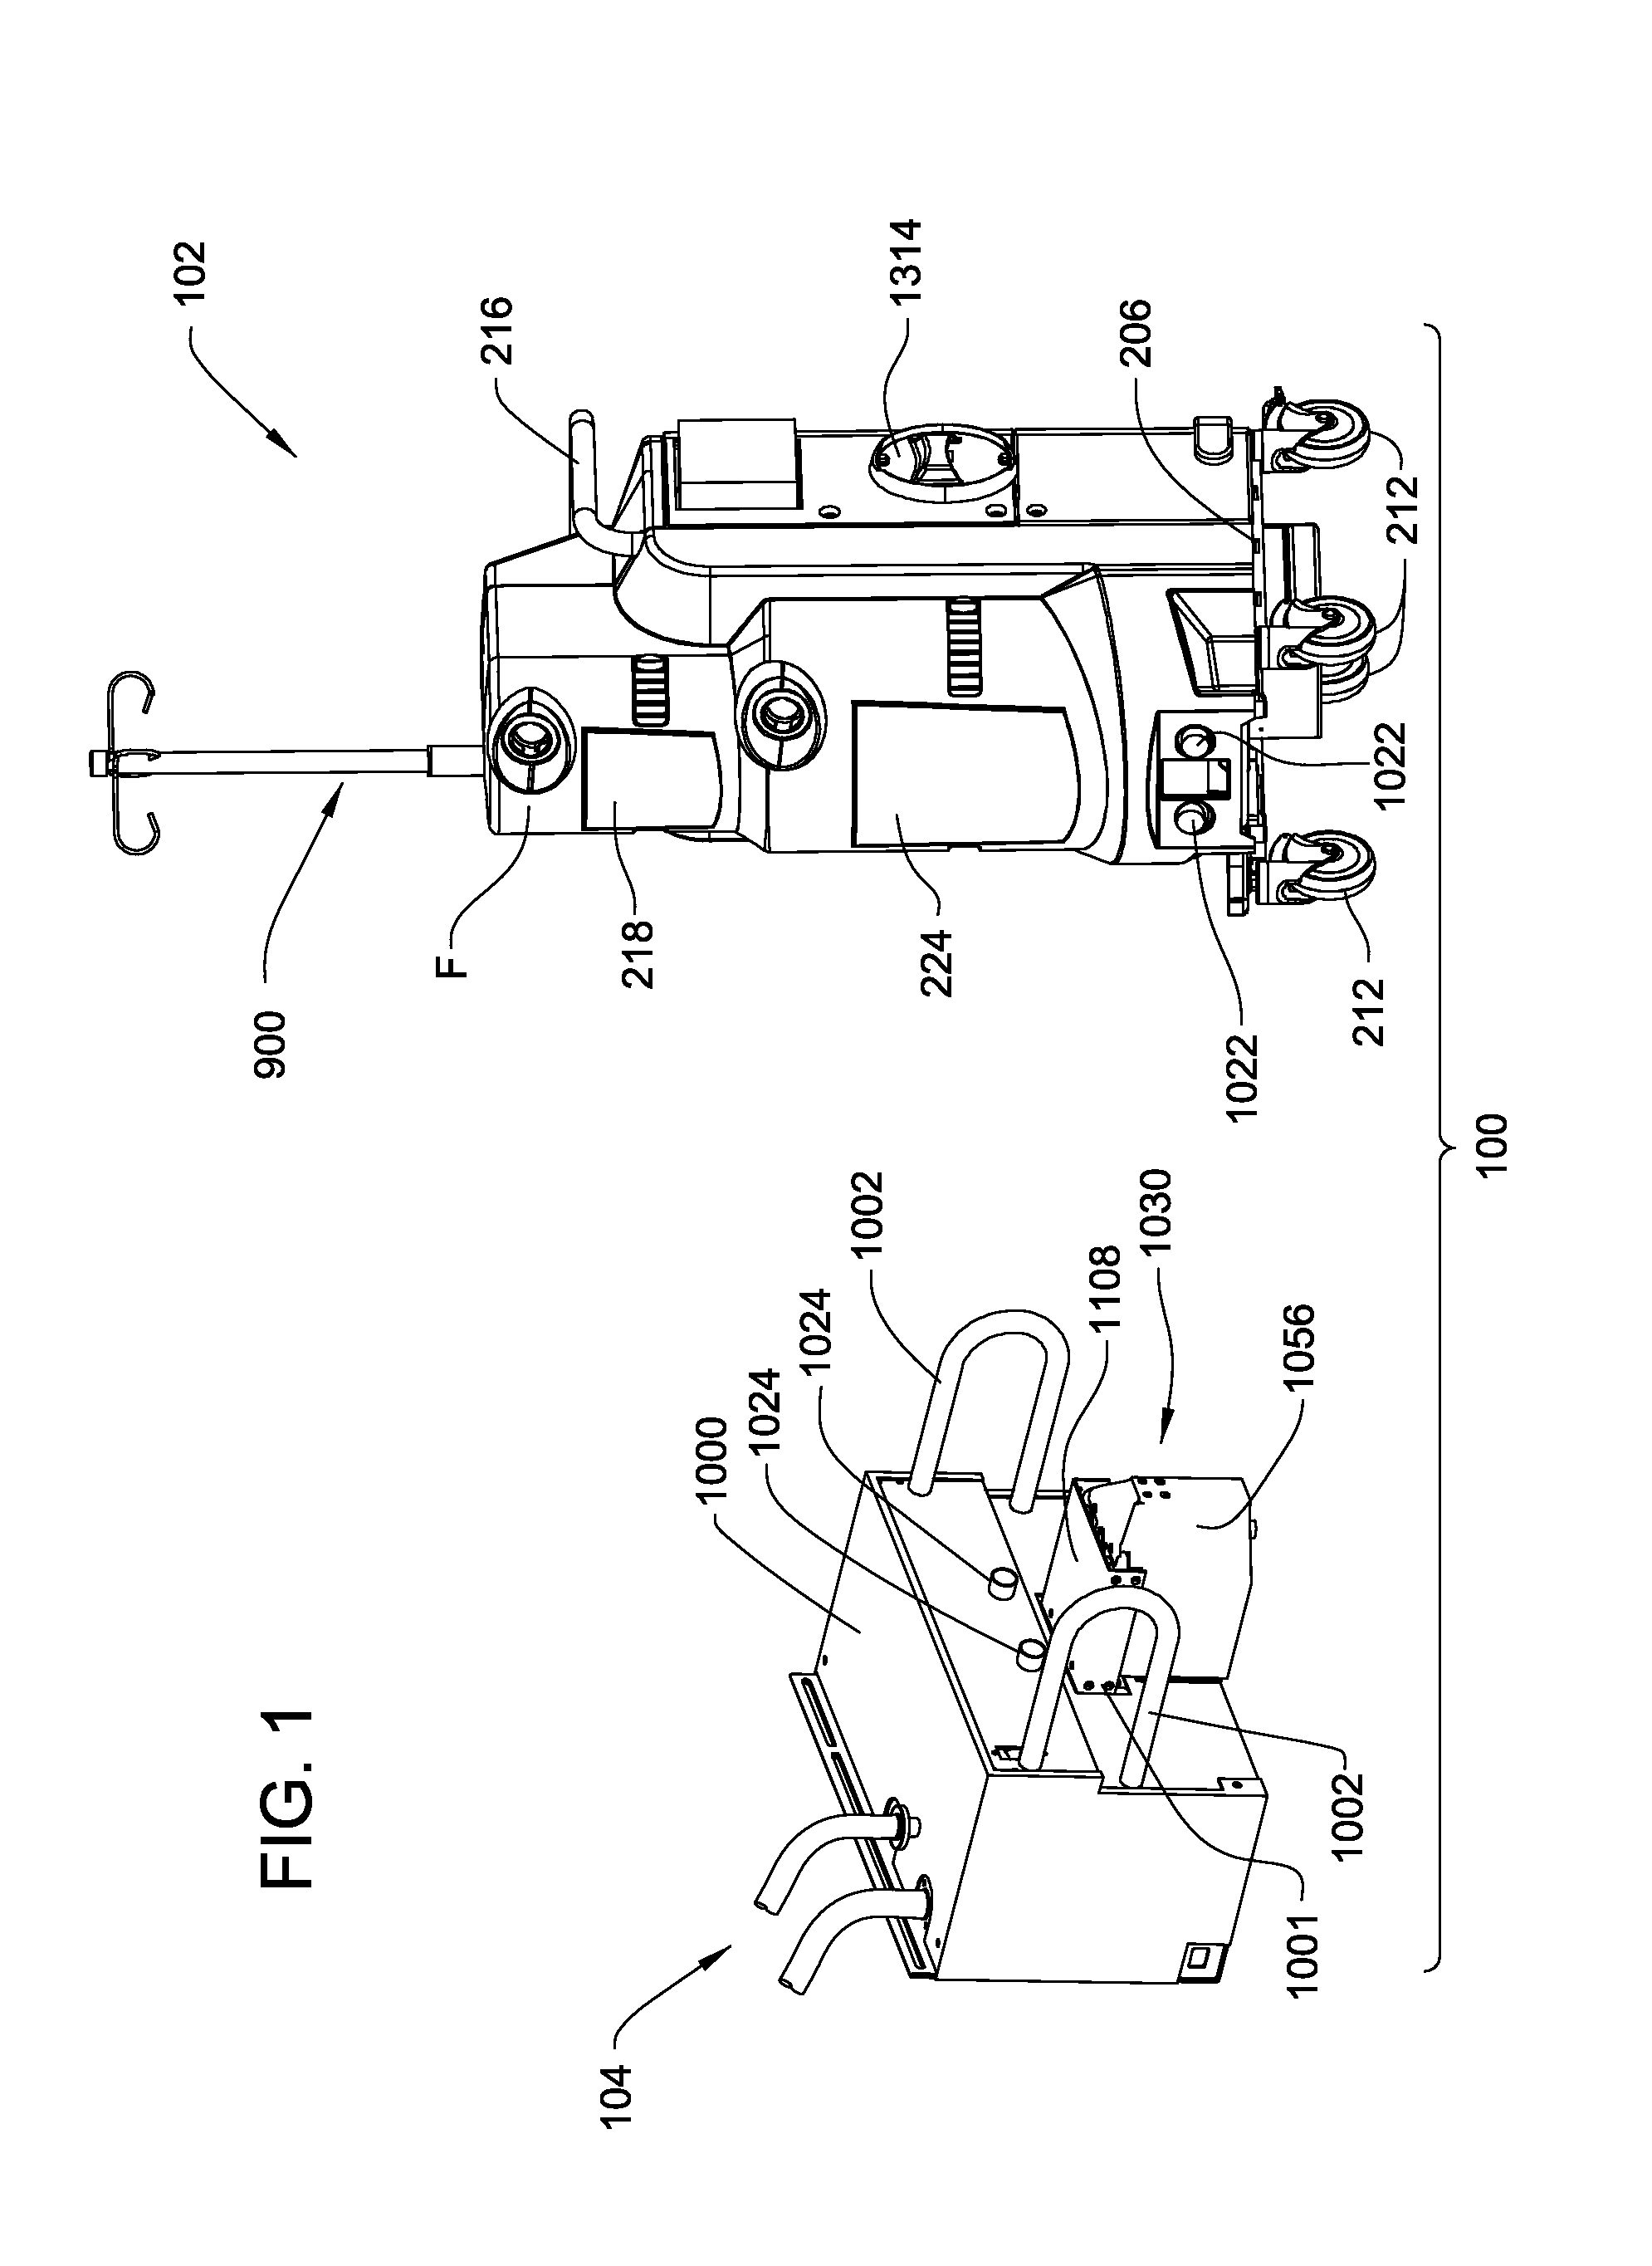 Medical/surgical waste collection unit including waste containers of different storage volumes with inter-container transfer valve and independently controlled vacuum levels